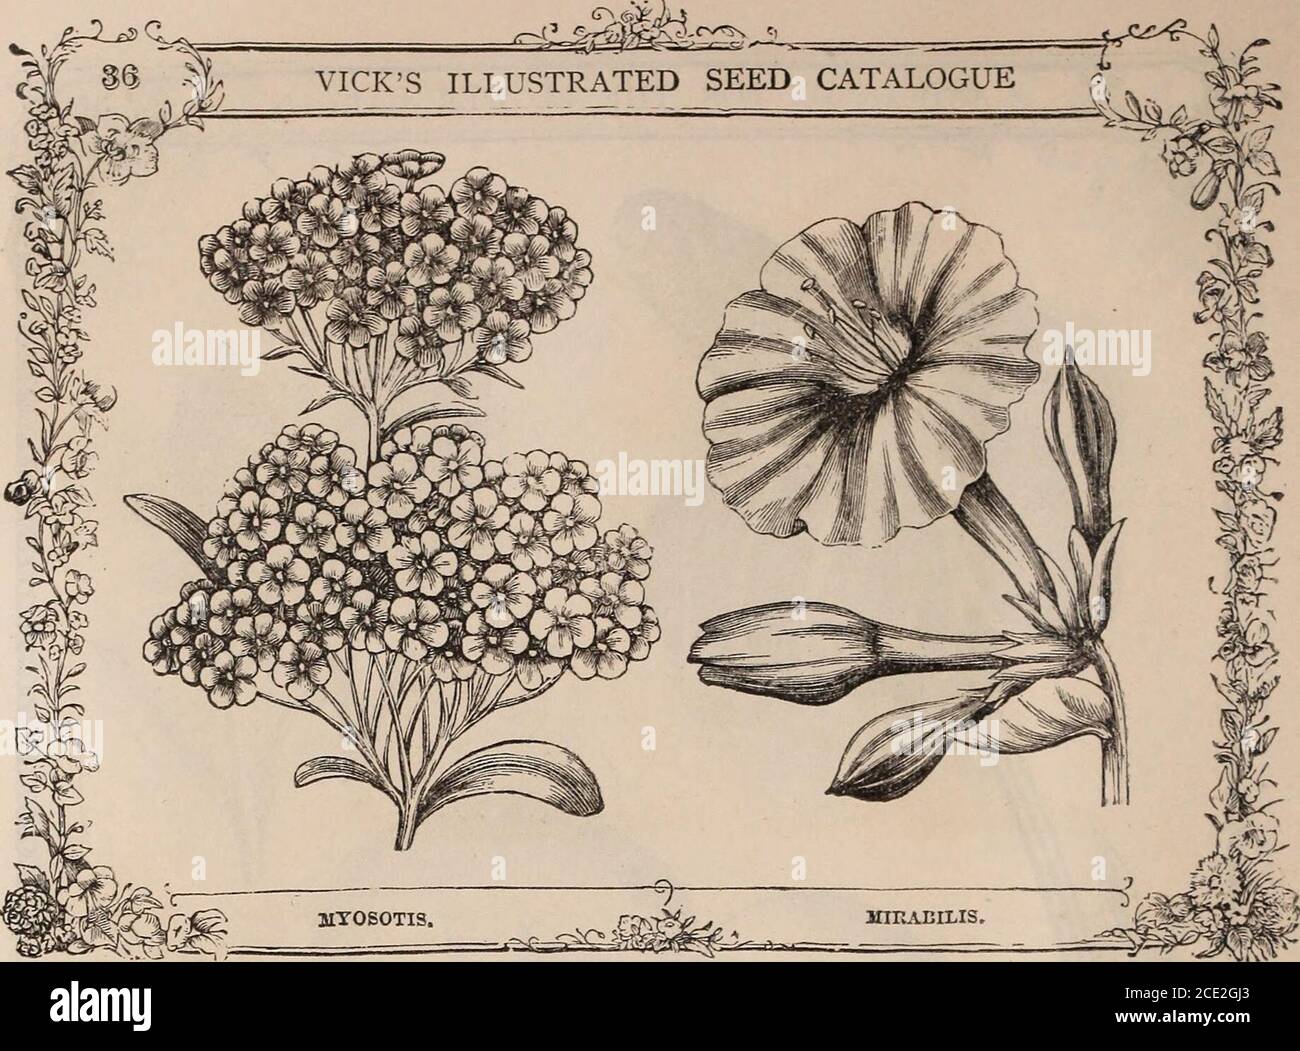 . Vick's illustrated catalogue and floral guide, 1871 . MIMULUS— Continued. pkt&gt; cts. Mimulus roseus pallidus, new and very fine, 20 cupreus, beautiful, orange and crimson, 20 hybridus tigrinus, as beautifully spotted as the finest Calceolarias, . 10 hybridus tigrinus bruneus, stems and leaves dark brown, with very large, deep yellow, dotted flowers; new, 25 hybridus tigrinus flore-pleno, a new double Mimulus from Mr. Bulls celebrated collection; flowers more durable than any other Mimulus. (Engraving, p. 84.) 50 cardinalis, fine scarlet, 10 moschatus, (Musk Plant,) 10 quinquevulnerus maxim Stock Photo